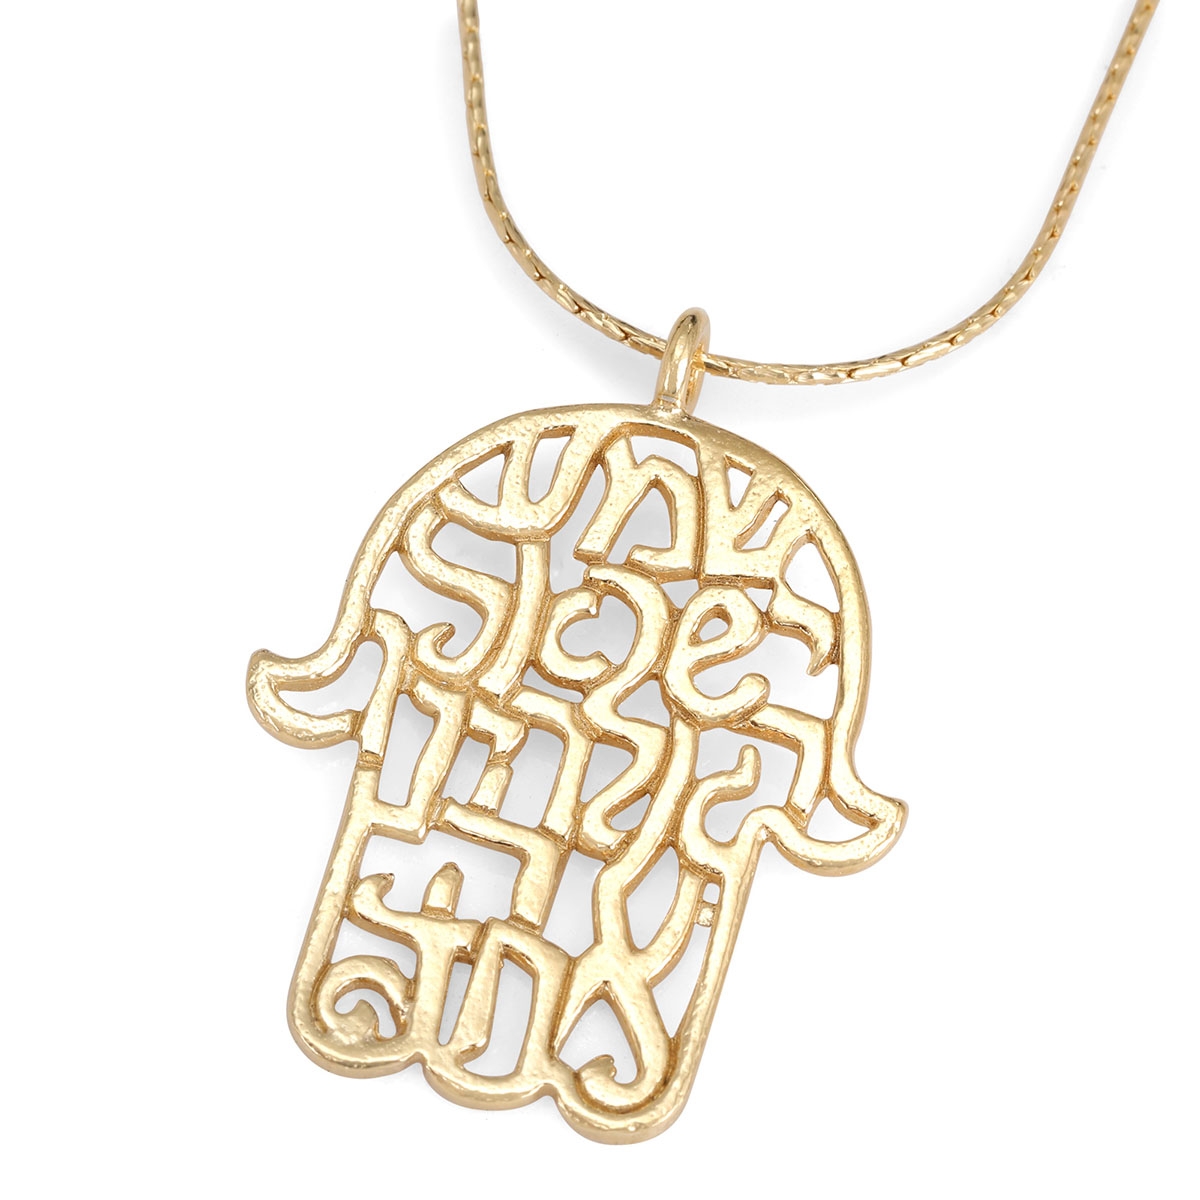 Gold-Plated Hamsa Necklace With Shema Yisrael Design - 1